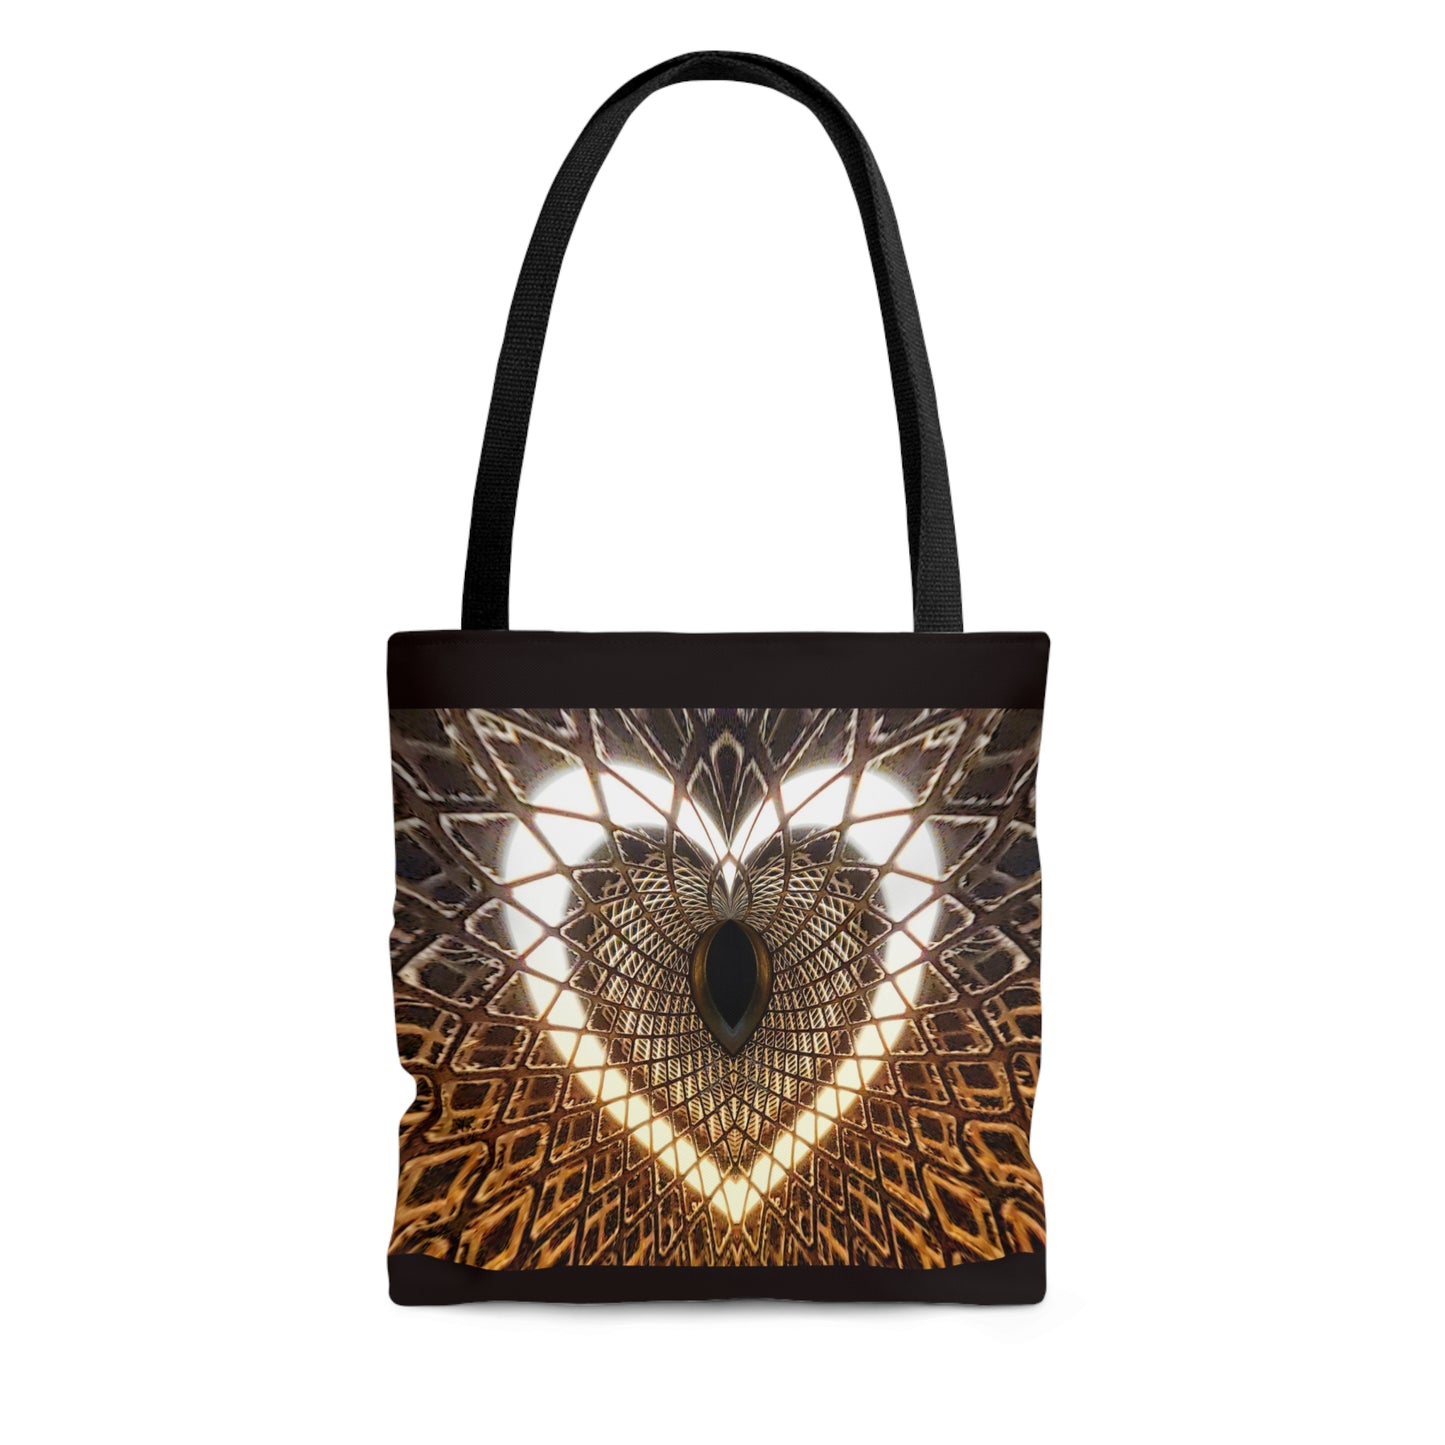 "This Old Dusty Heart of Mine" Panache Tote Bag